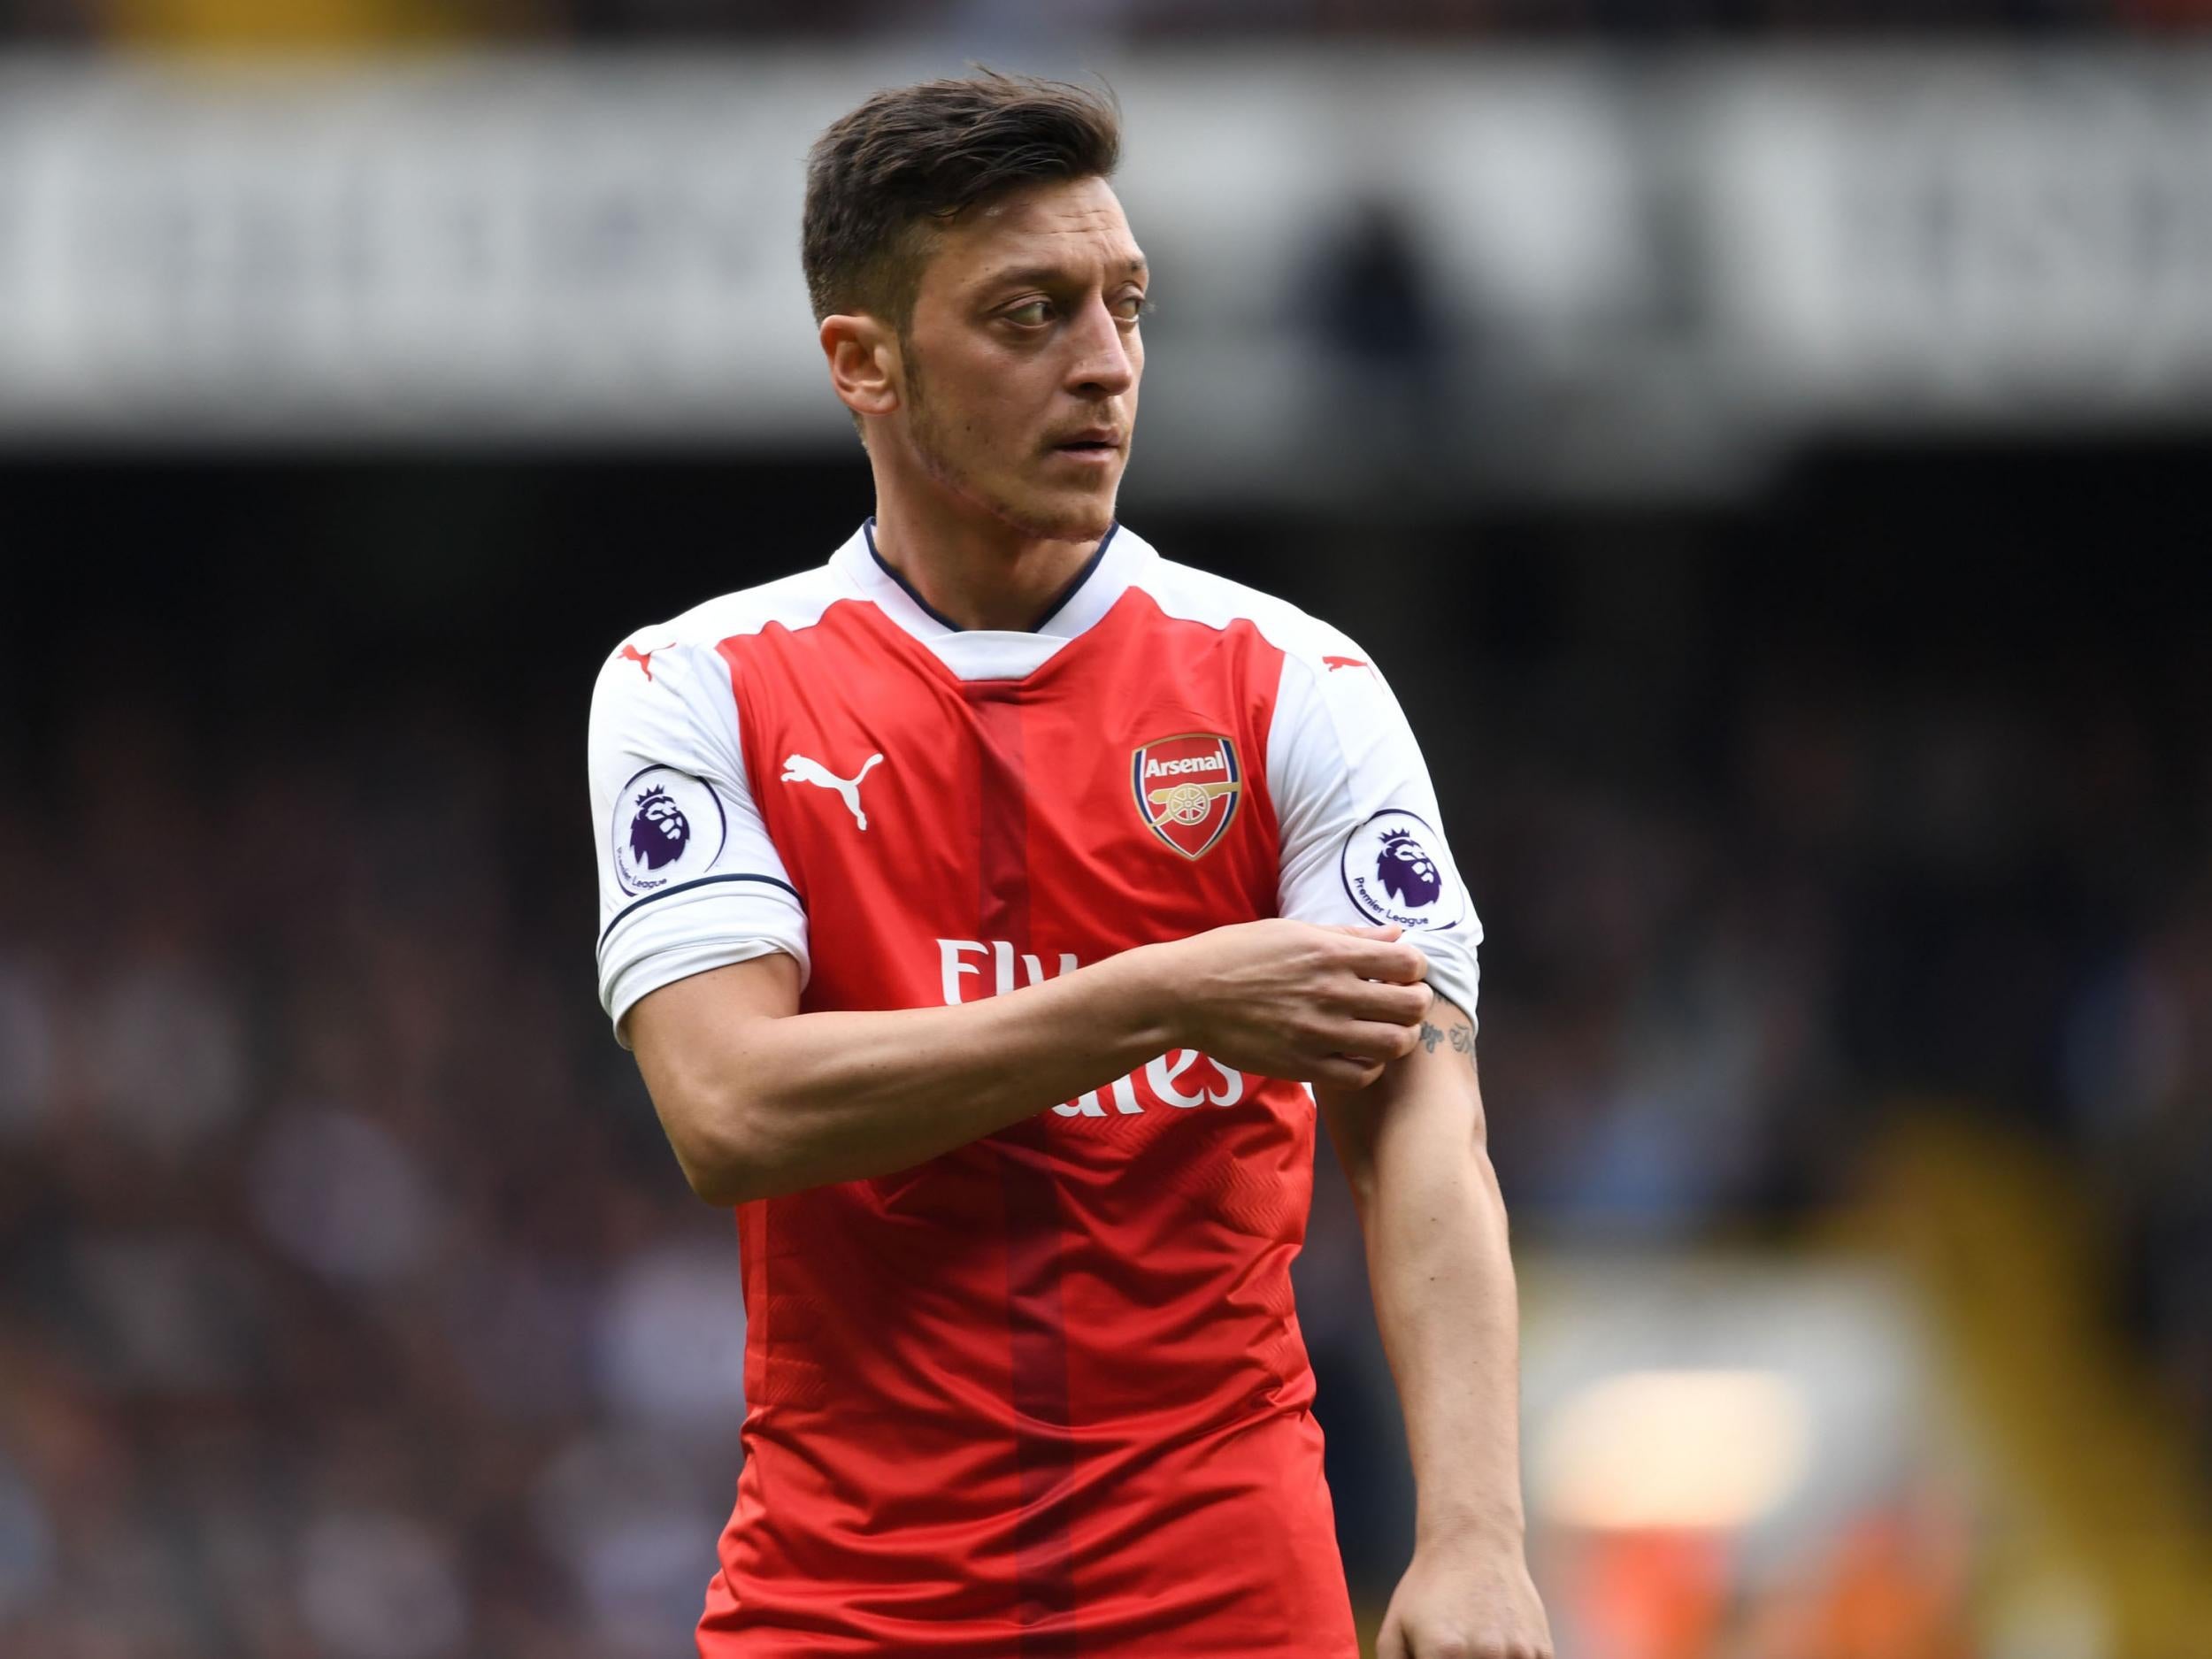 Ozil has only managed a third of the number of assists he got last season